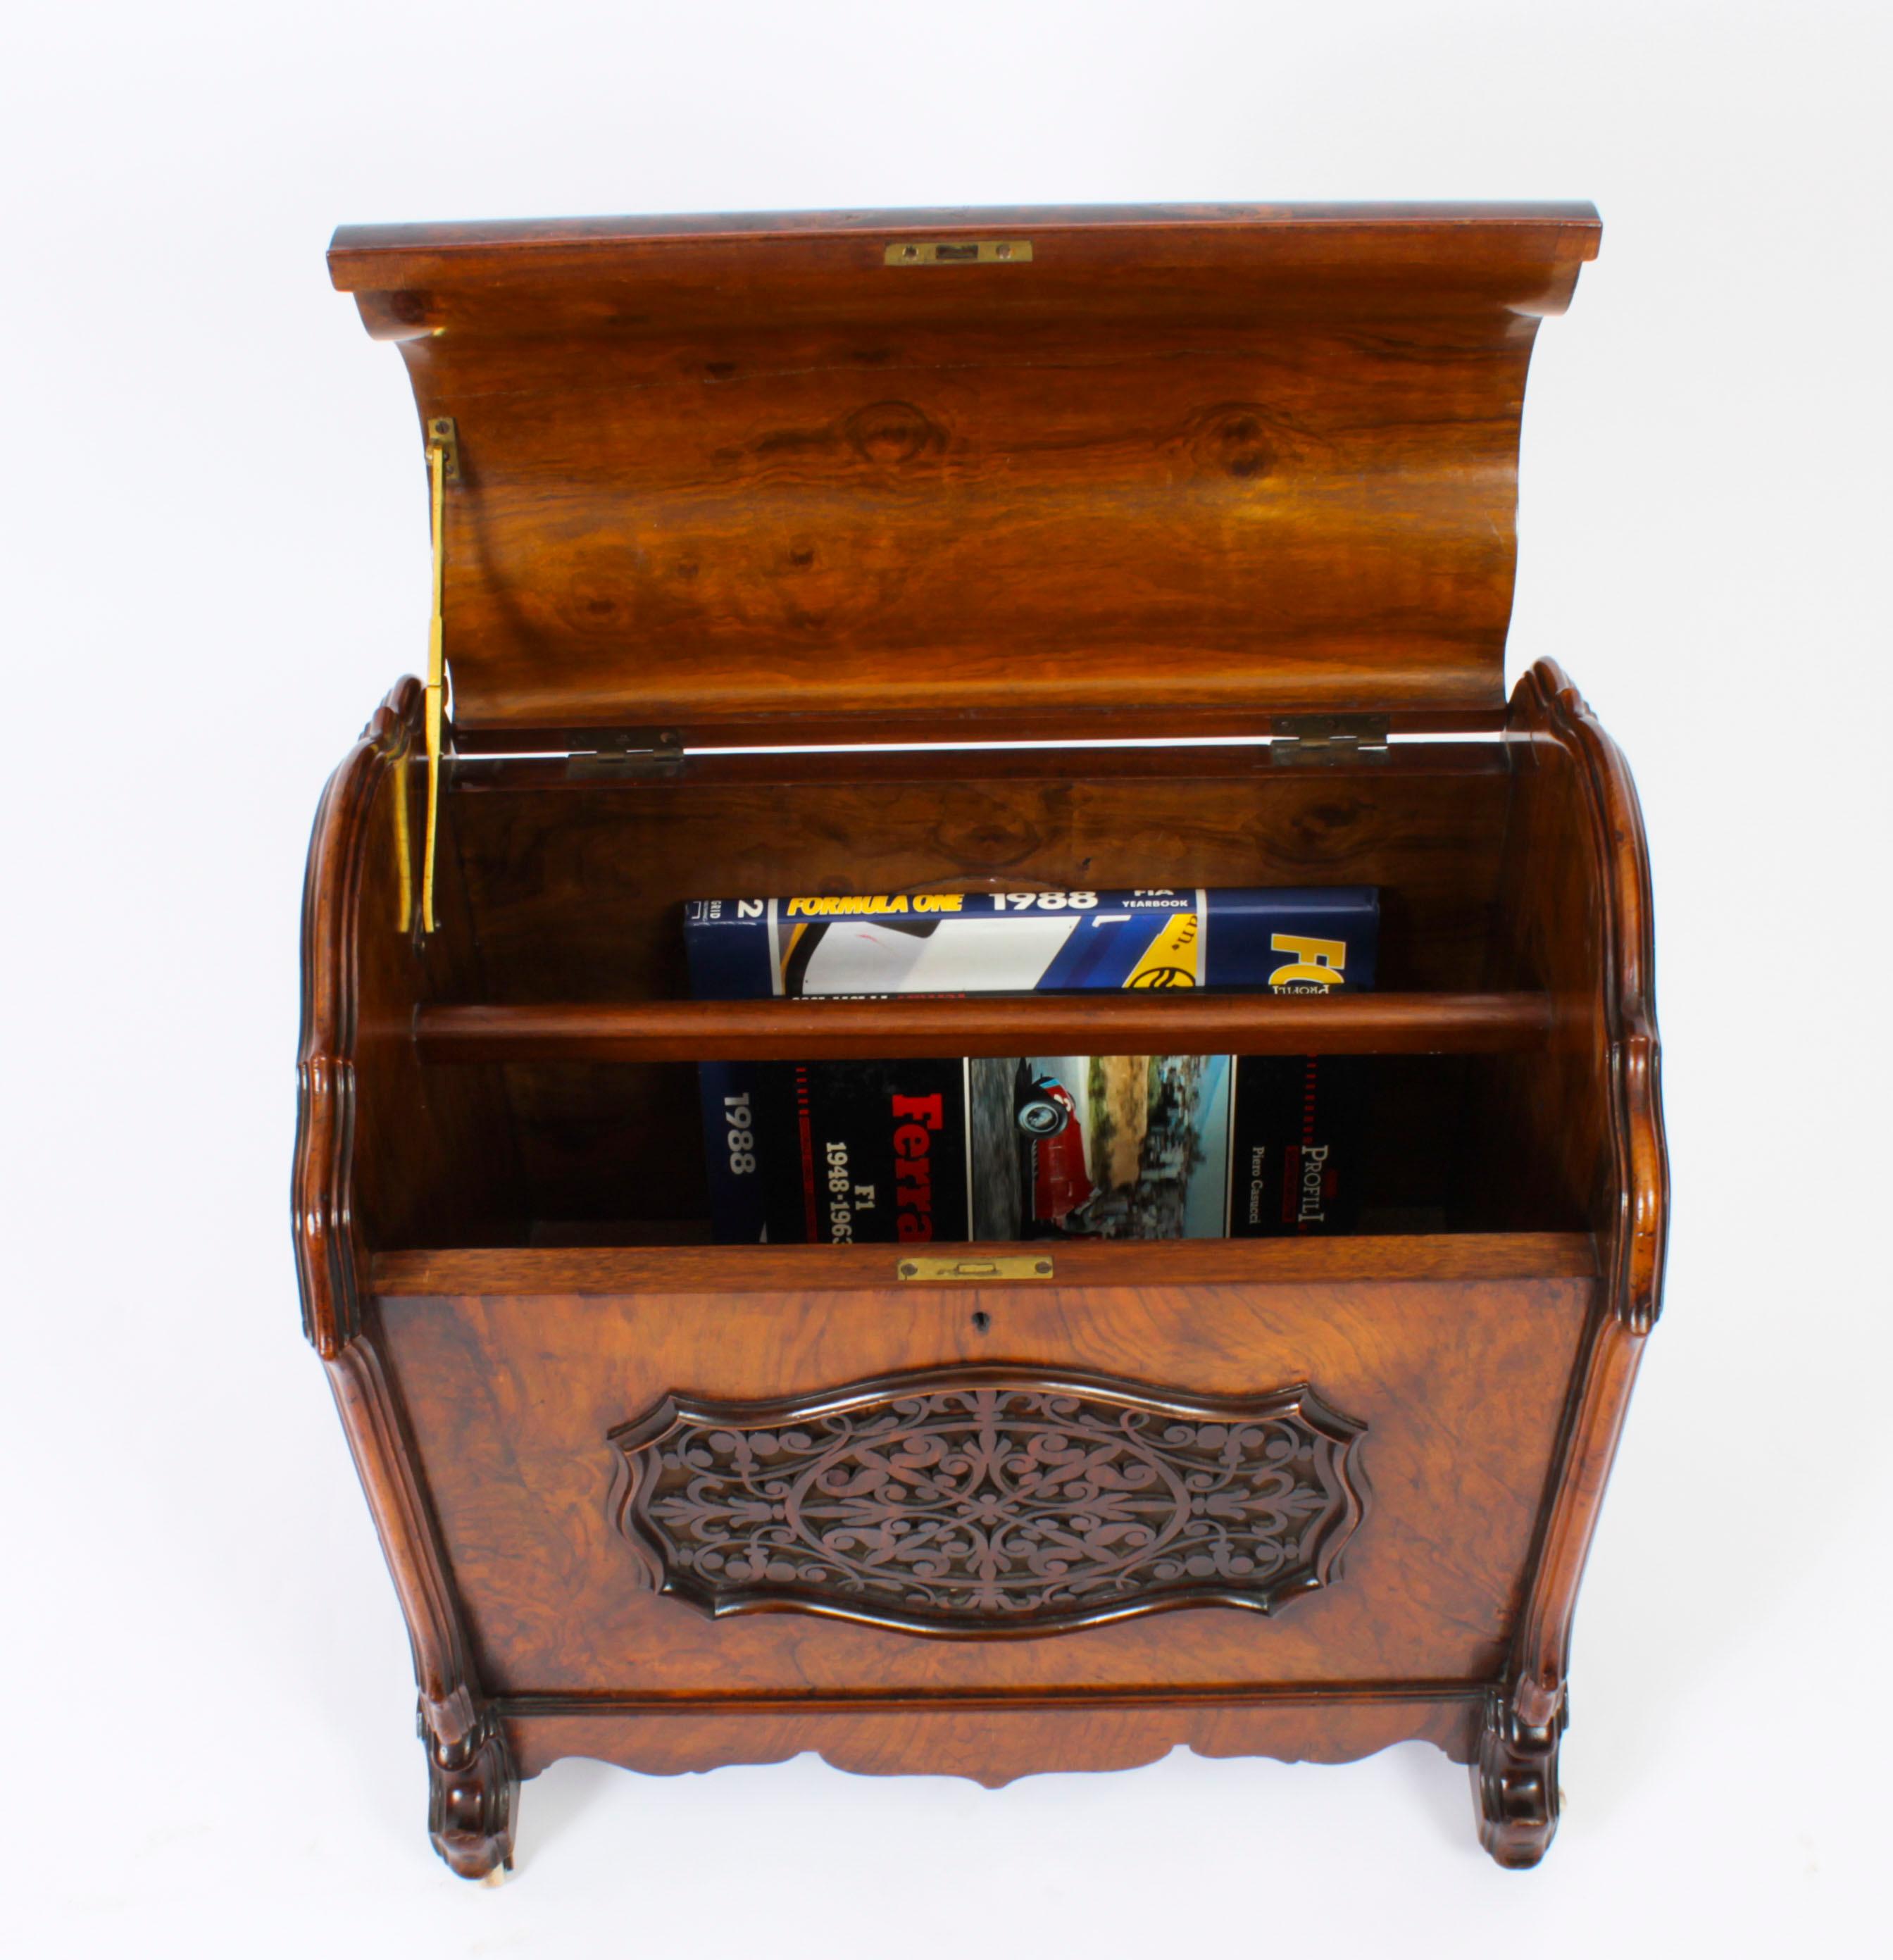 This is a gorgeous antique Victorian burr walnut pierced and carved enclosed Canterbury circa 1870 in date.
 
The grain of the burr walnut is truly beautiful.

It features a hinged top opening to a divided interior. The sides are fitted with